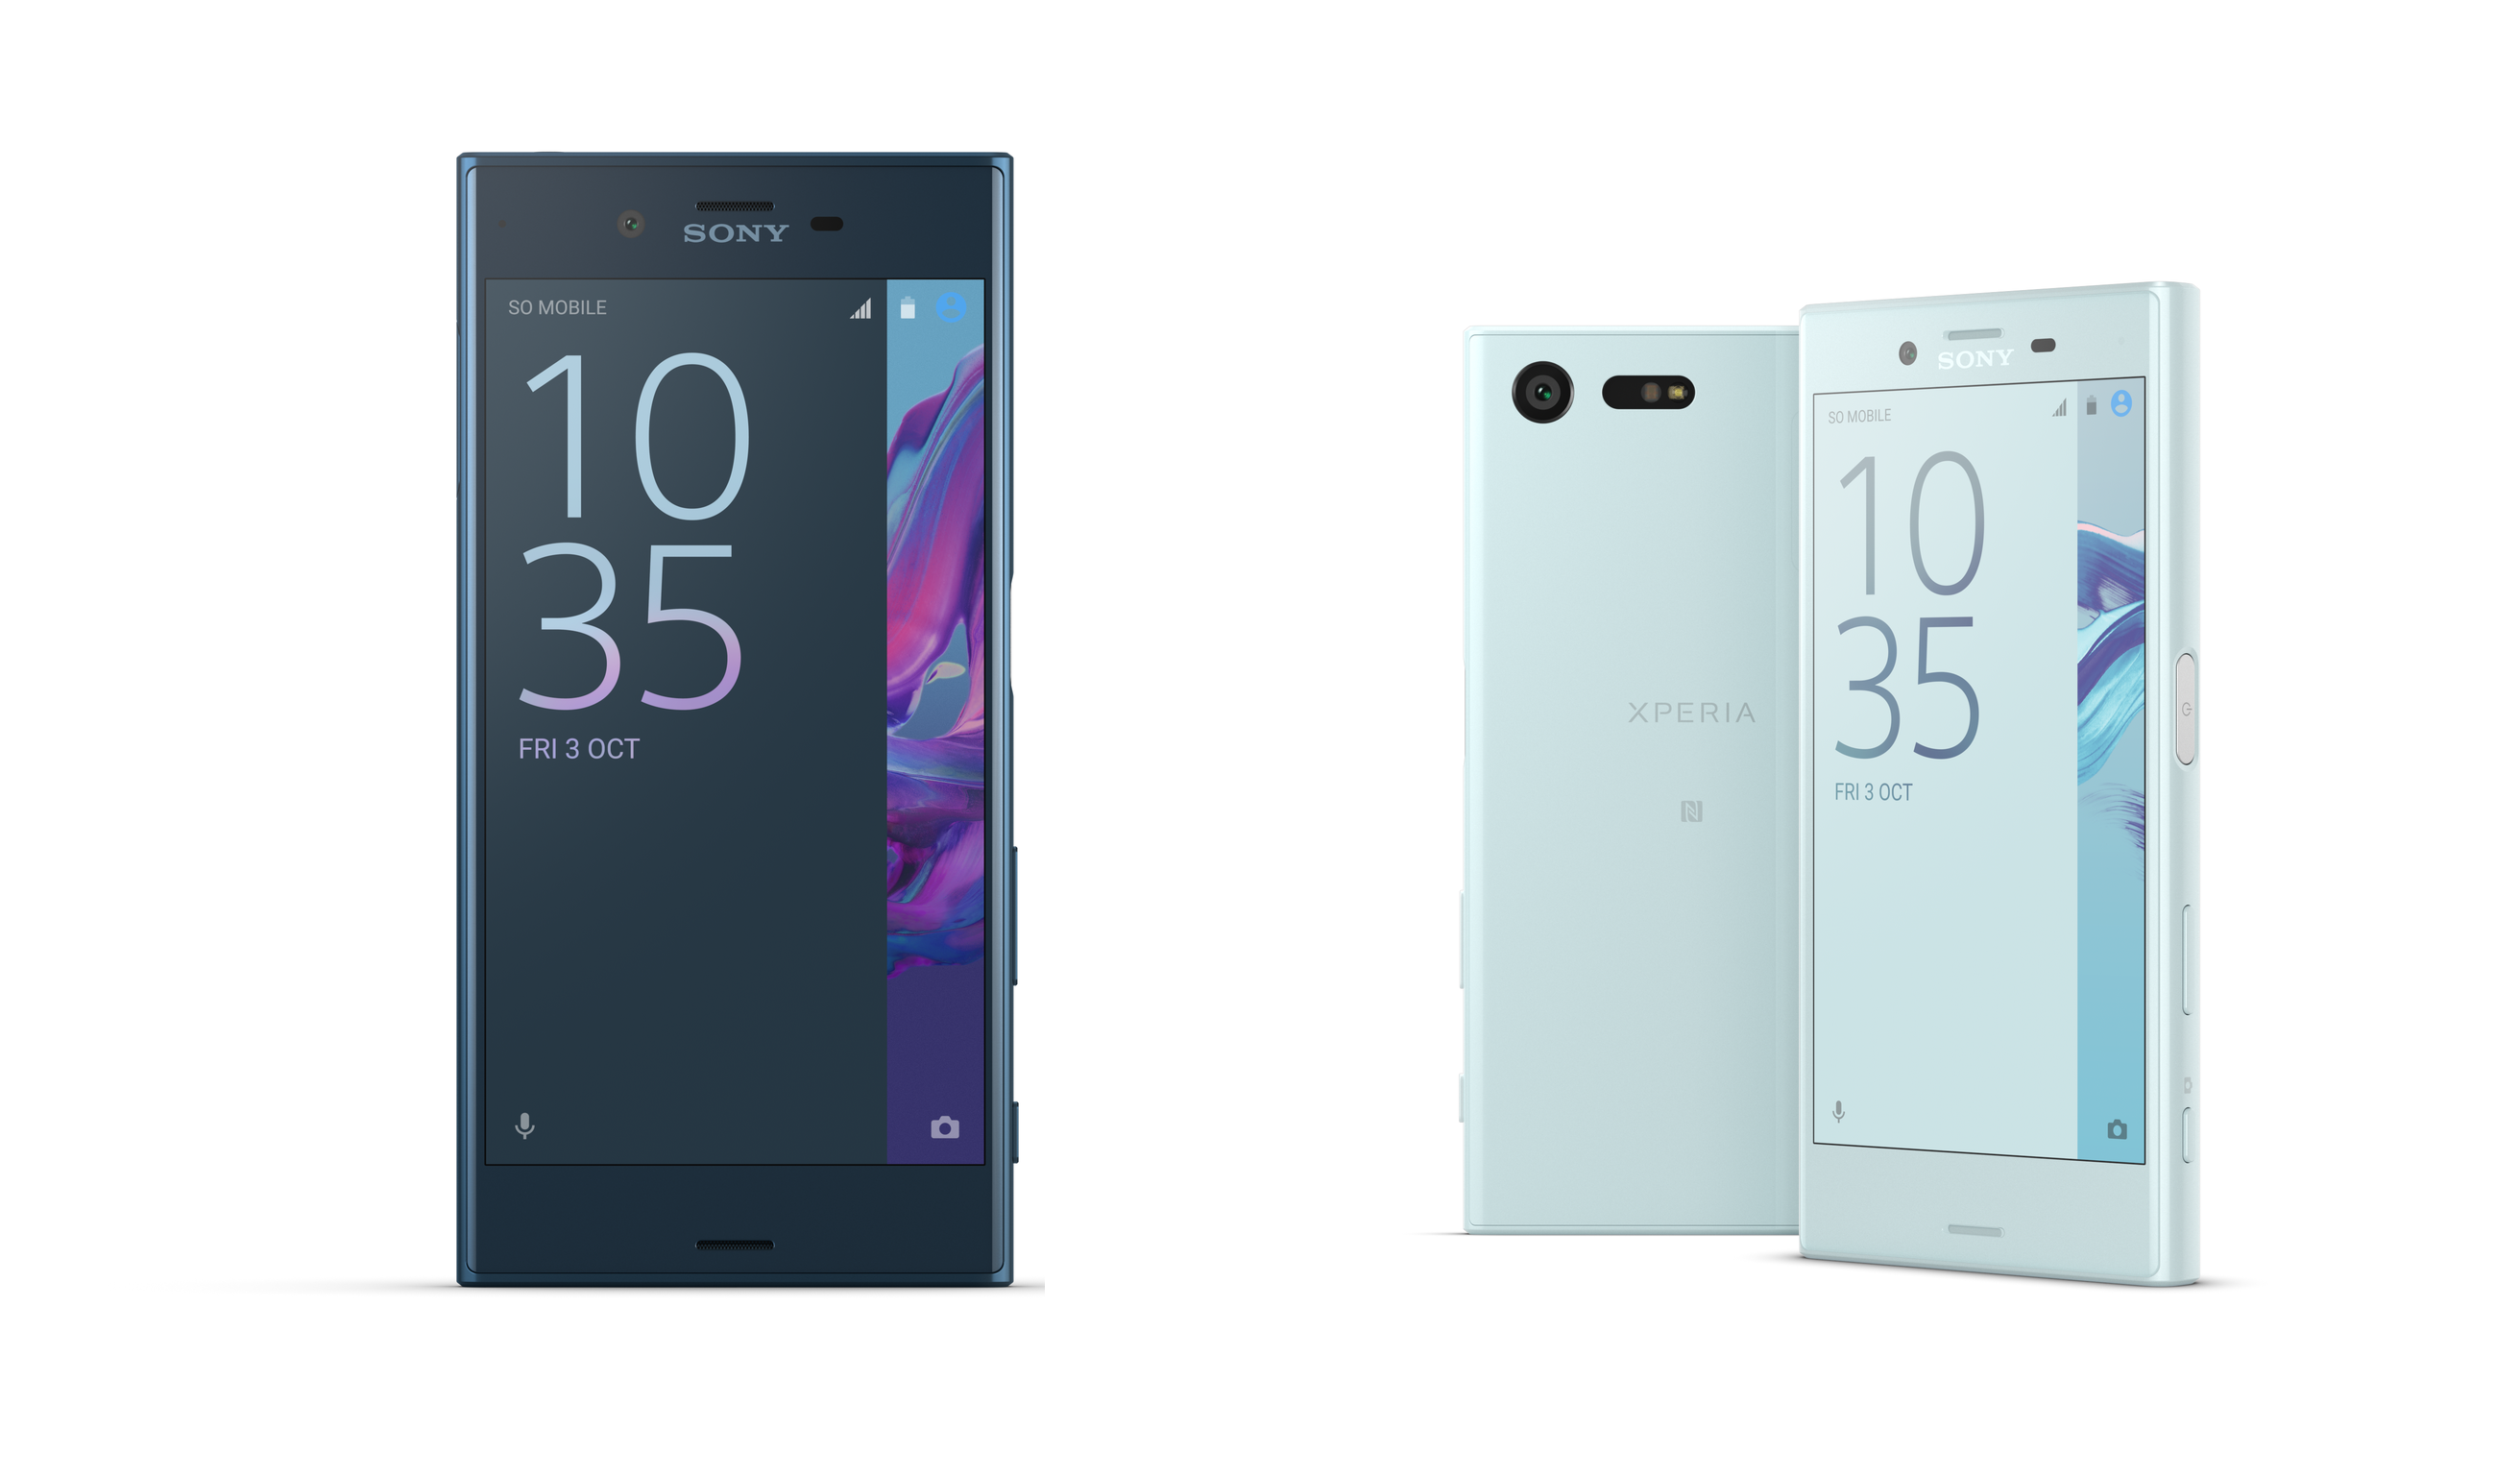 Sony Xperia 2016. Sony Xperia x 2016. Sony Xperia XZ Compact. Sony Xperia x Compact.